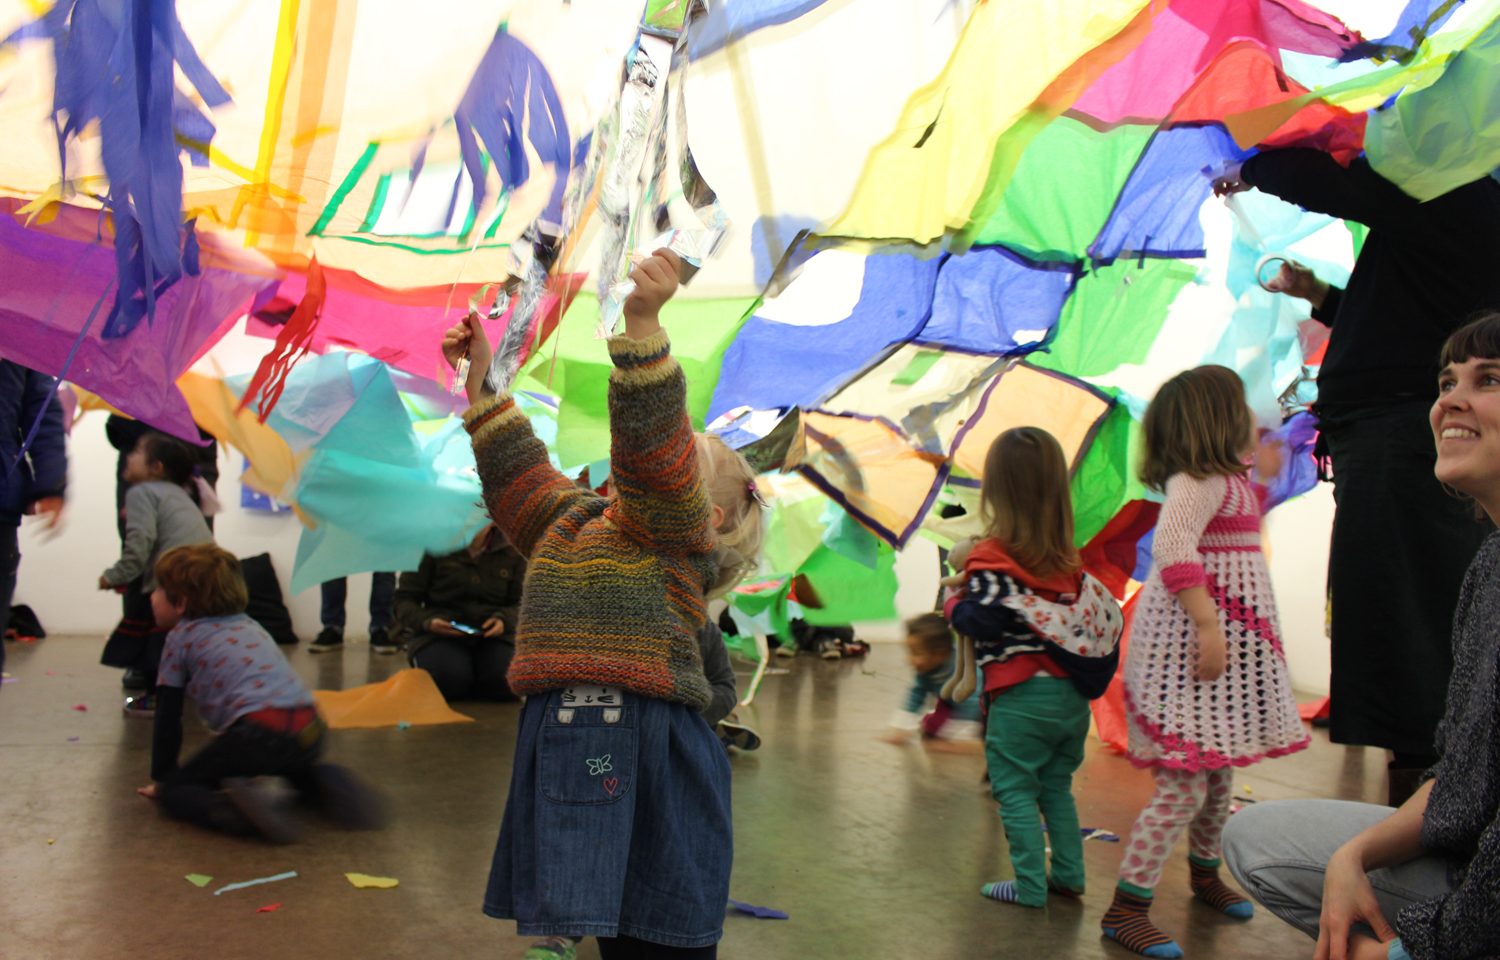 A small child raises her hands to the air to touch lots of pieces of coloured tissue paper above her. Behind other children are playing. To the right of the picture going out of the shot a woman is crouching down and smiling.